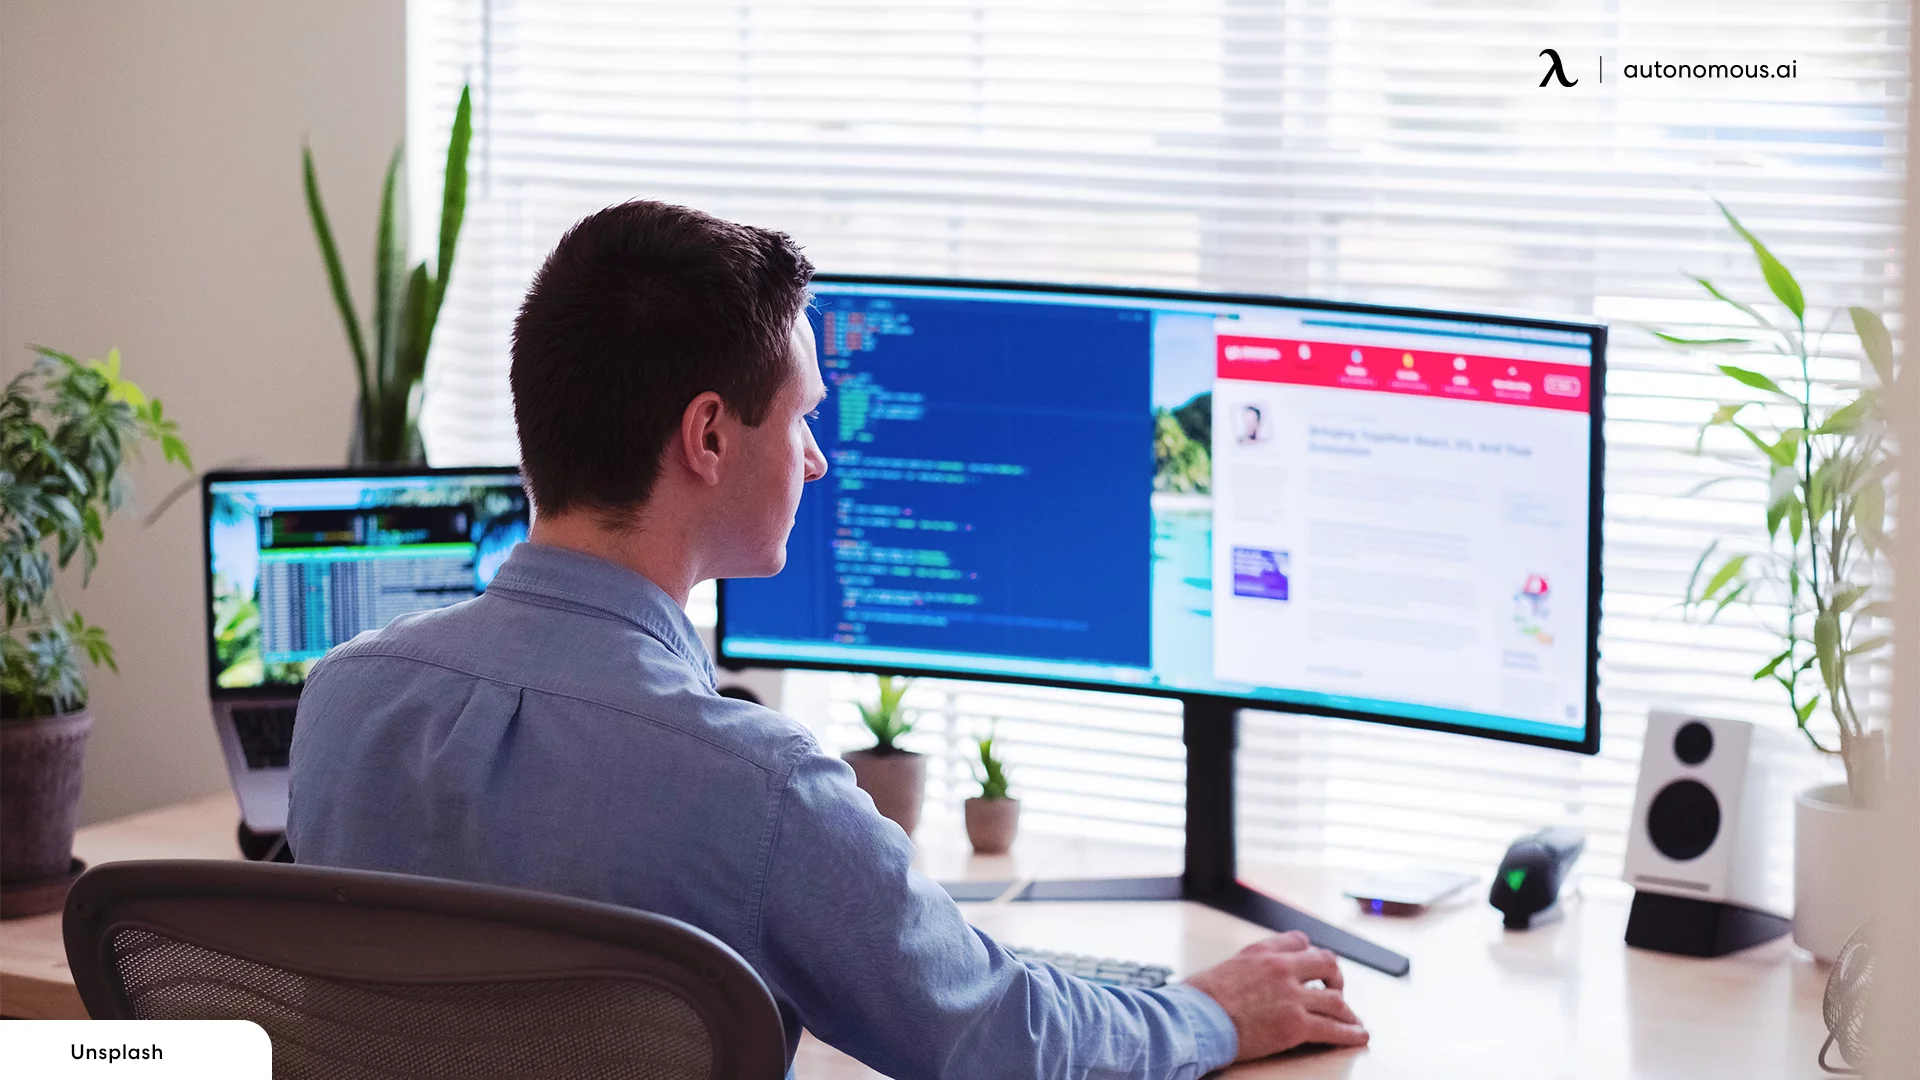 Why Choose a Curved Monitor for Work?